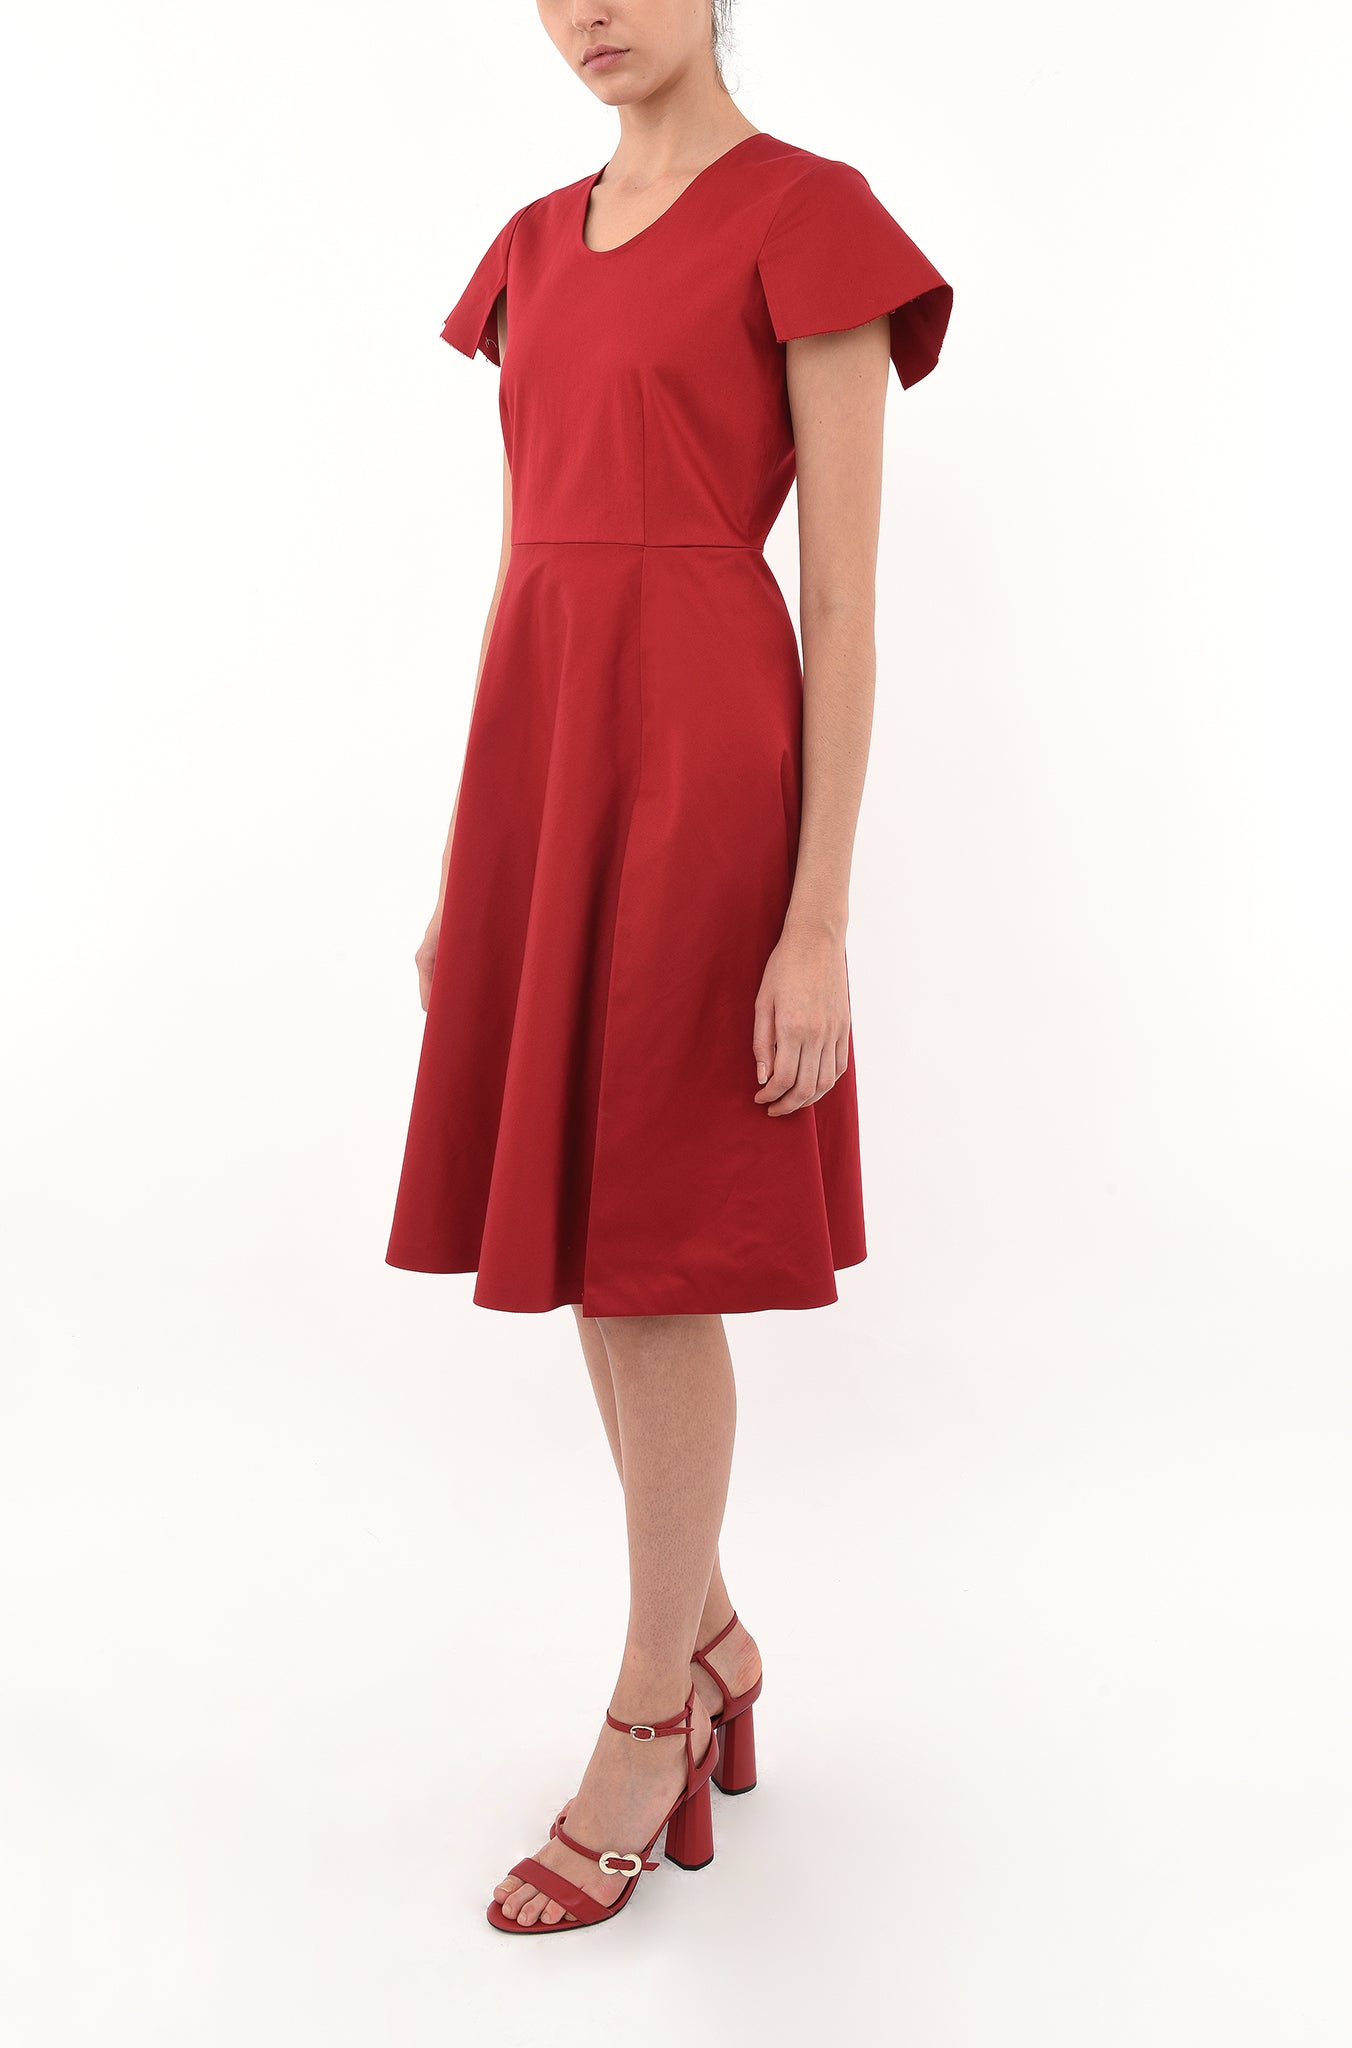 FIT-FLARE DRESS WITH CUT-AWAY SLEEVES